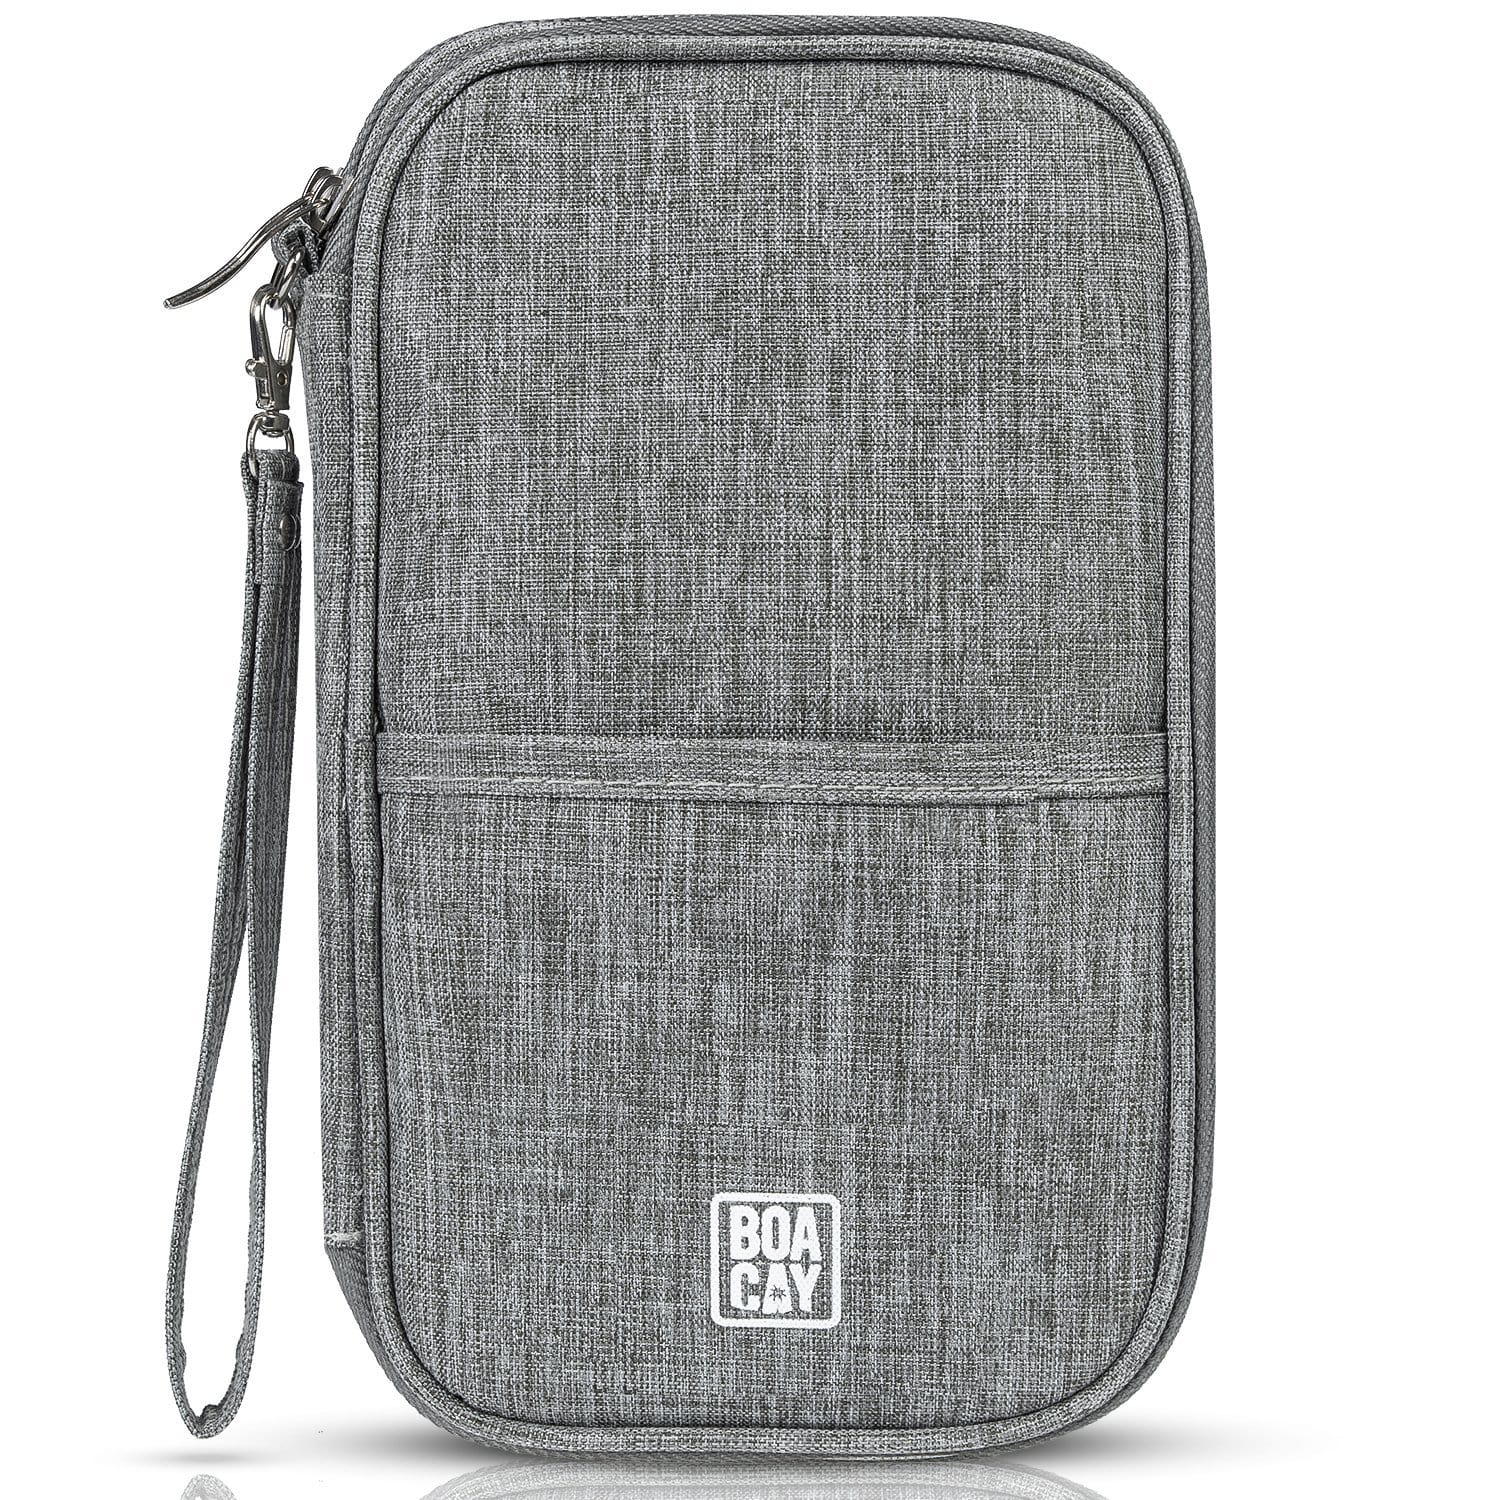 Premium Gray Travel Document Organizer and Passport Holder with Multiple Card Slots and Zipped Compartment